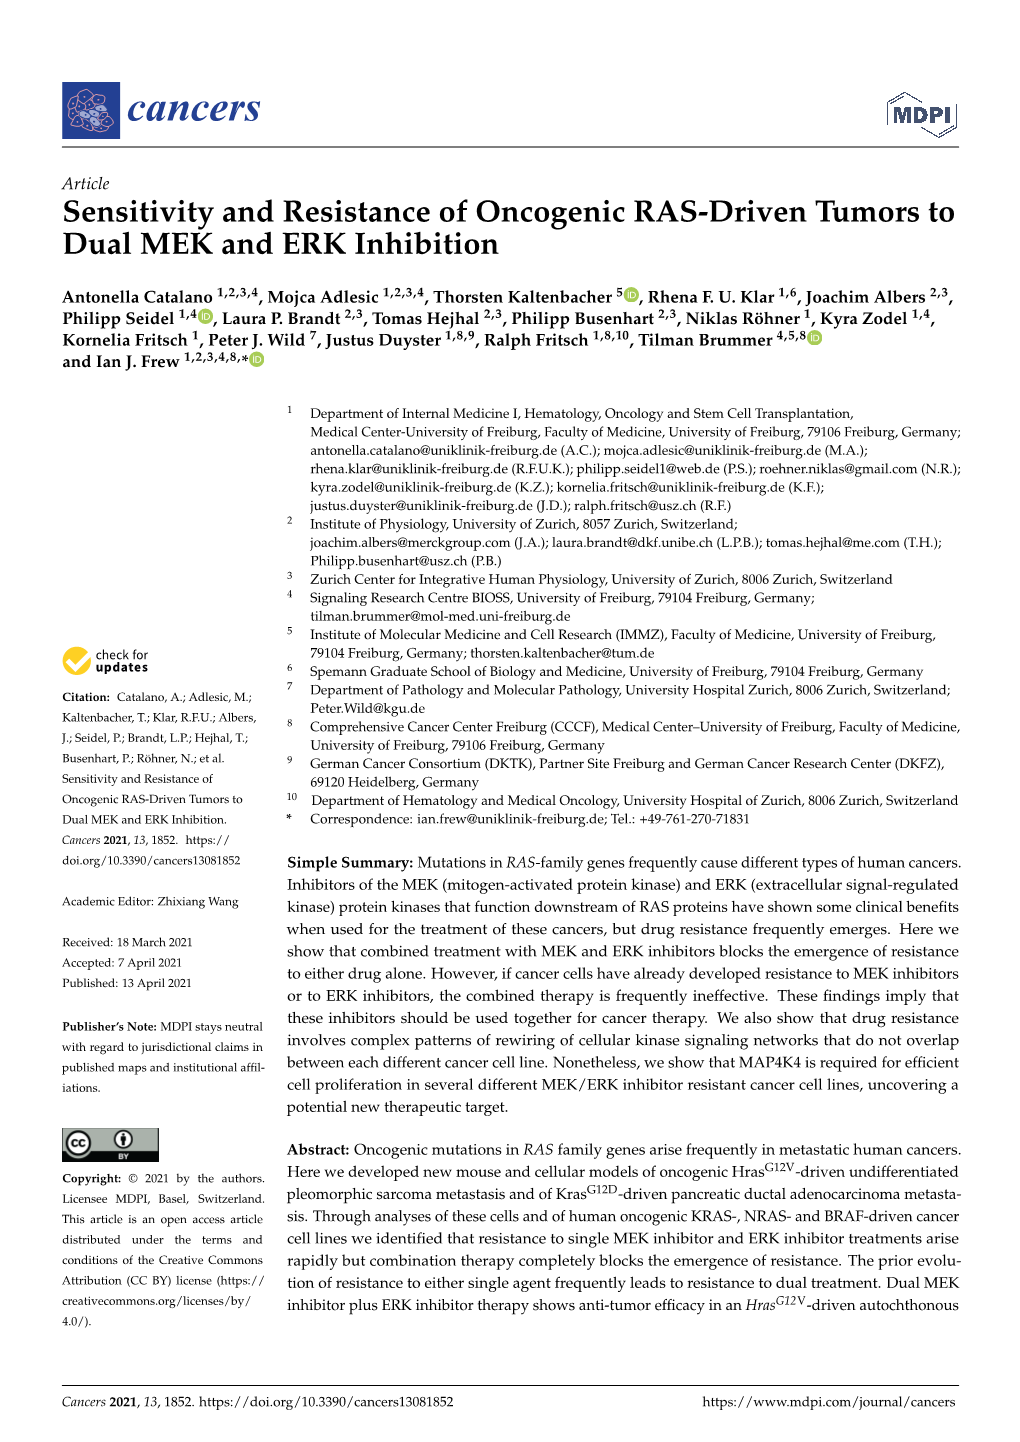 Sensitivity and Resistance of Oncogenic RAS-Driven Tumors to Dual MEK and ERK Inhibition